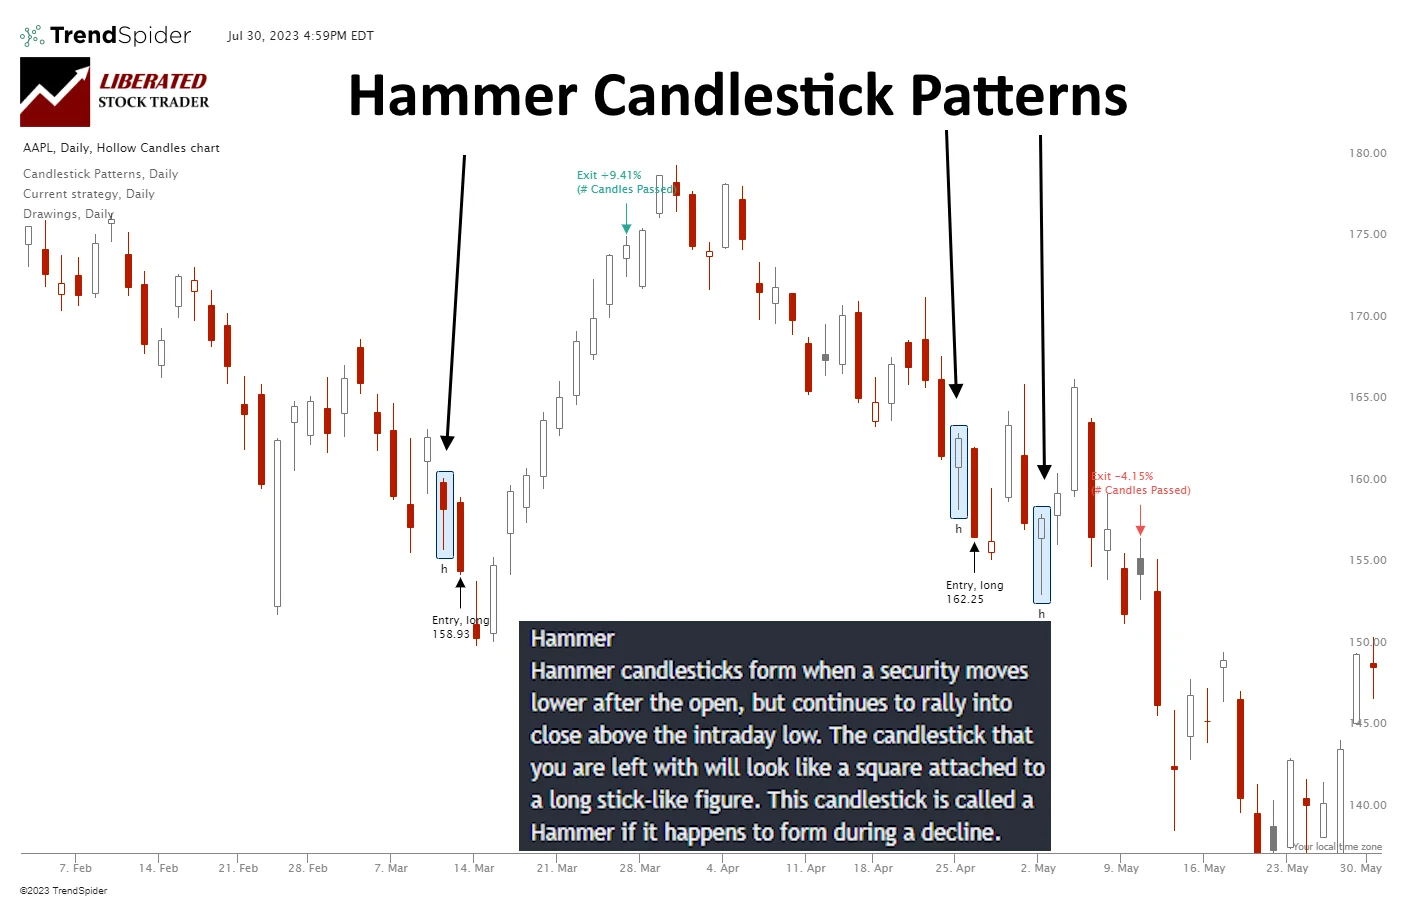 The Hammer Candlestick Explained: The Hammer Candle represents a battle between buyers and sellers where the sellers initially have the upper hand, driving prices down. However, the buyers eventually step in and rally, driving the price back up to the opening level.